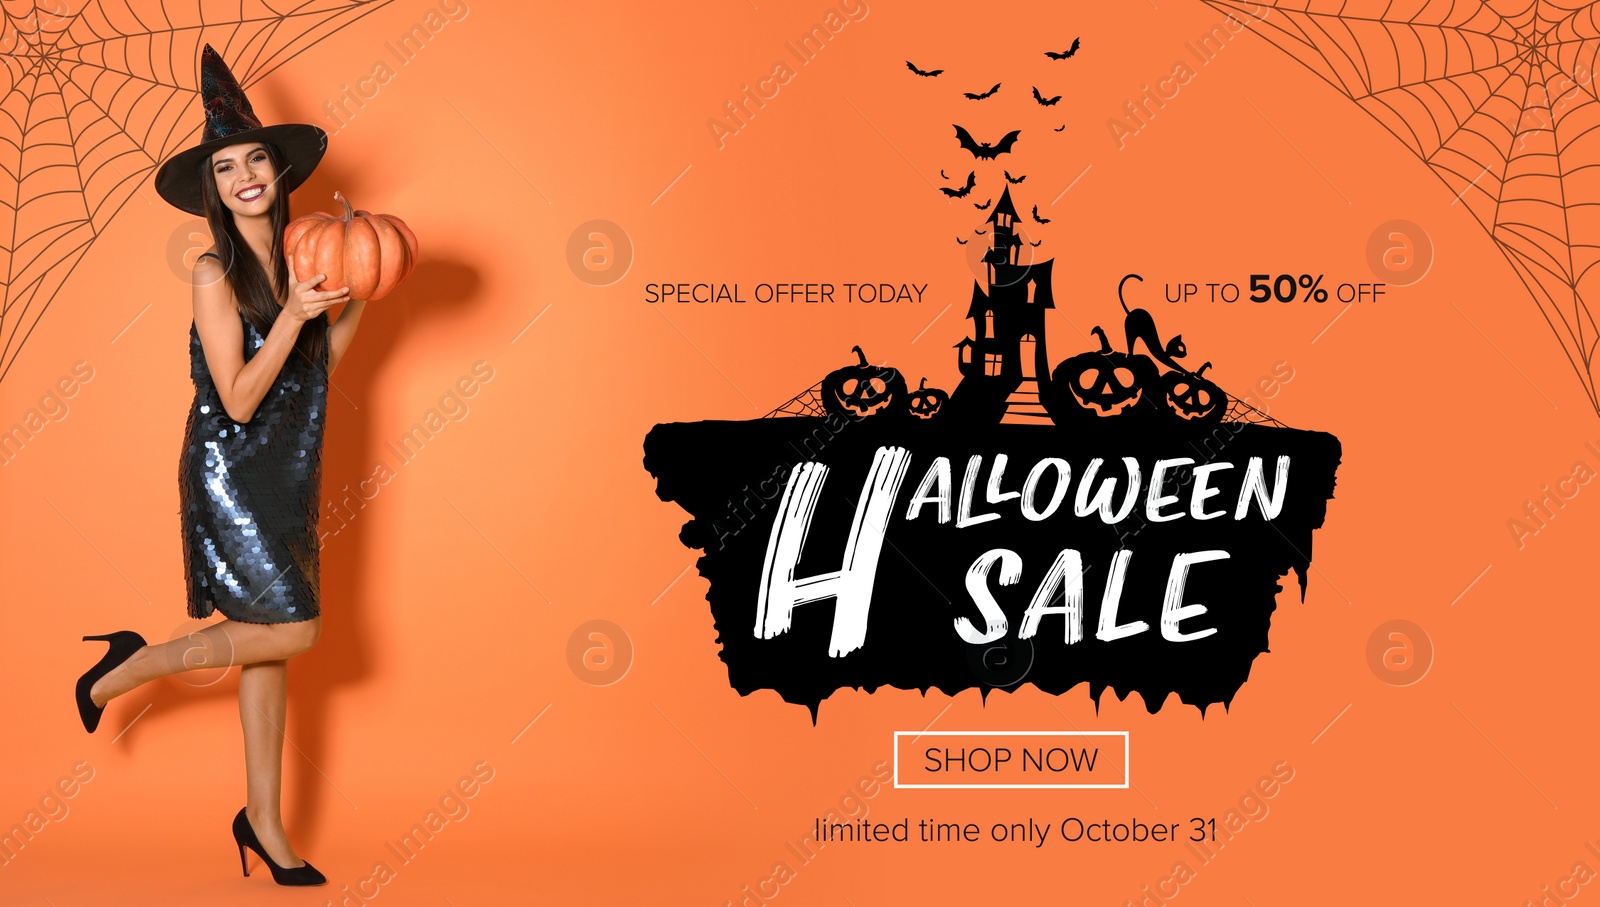 Image of Halloween sale ad design with woman dressed as witch holding pumpkin on orange background